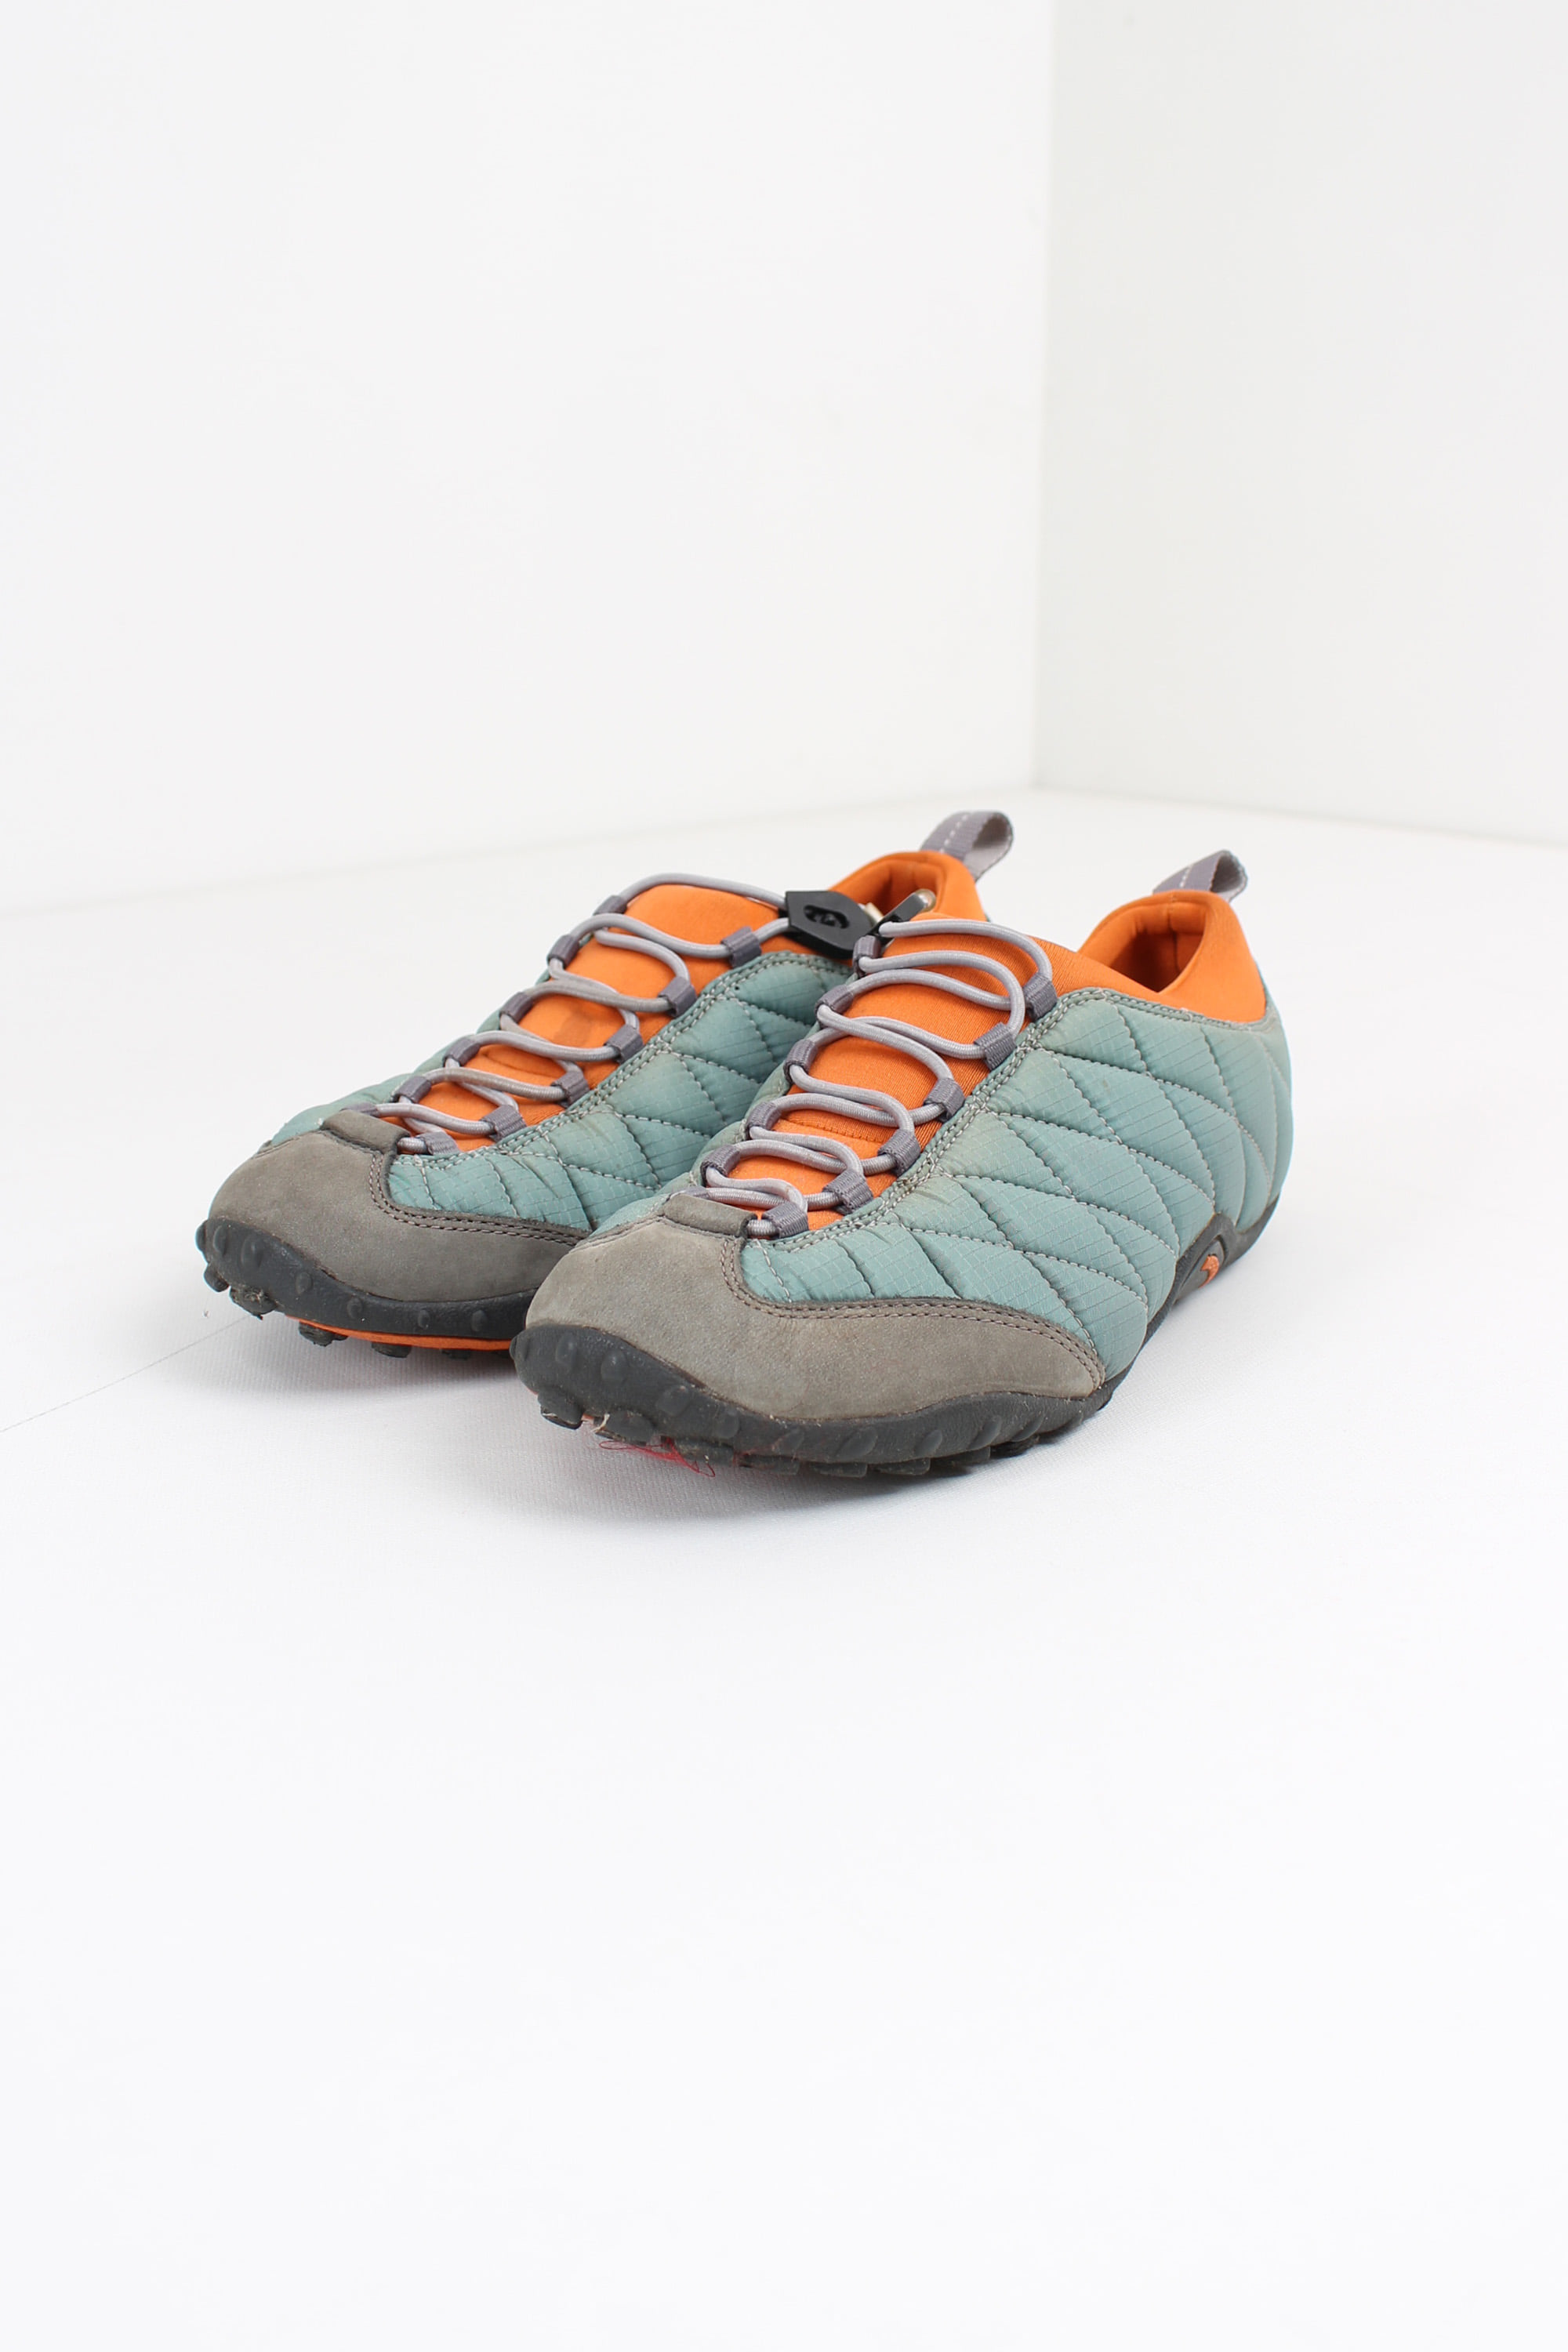 MERRELL padded shoes